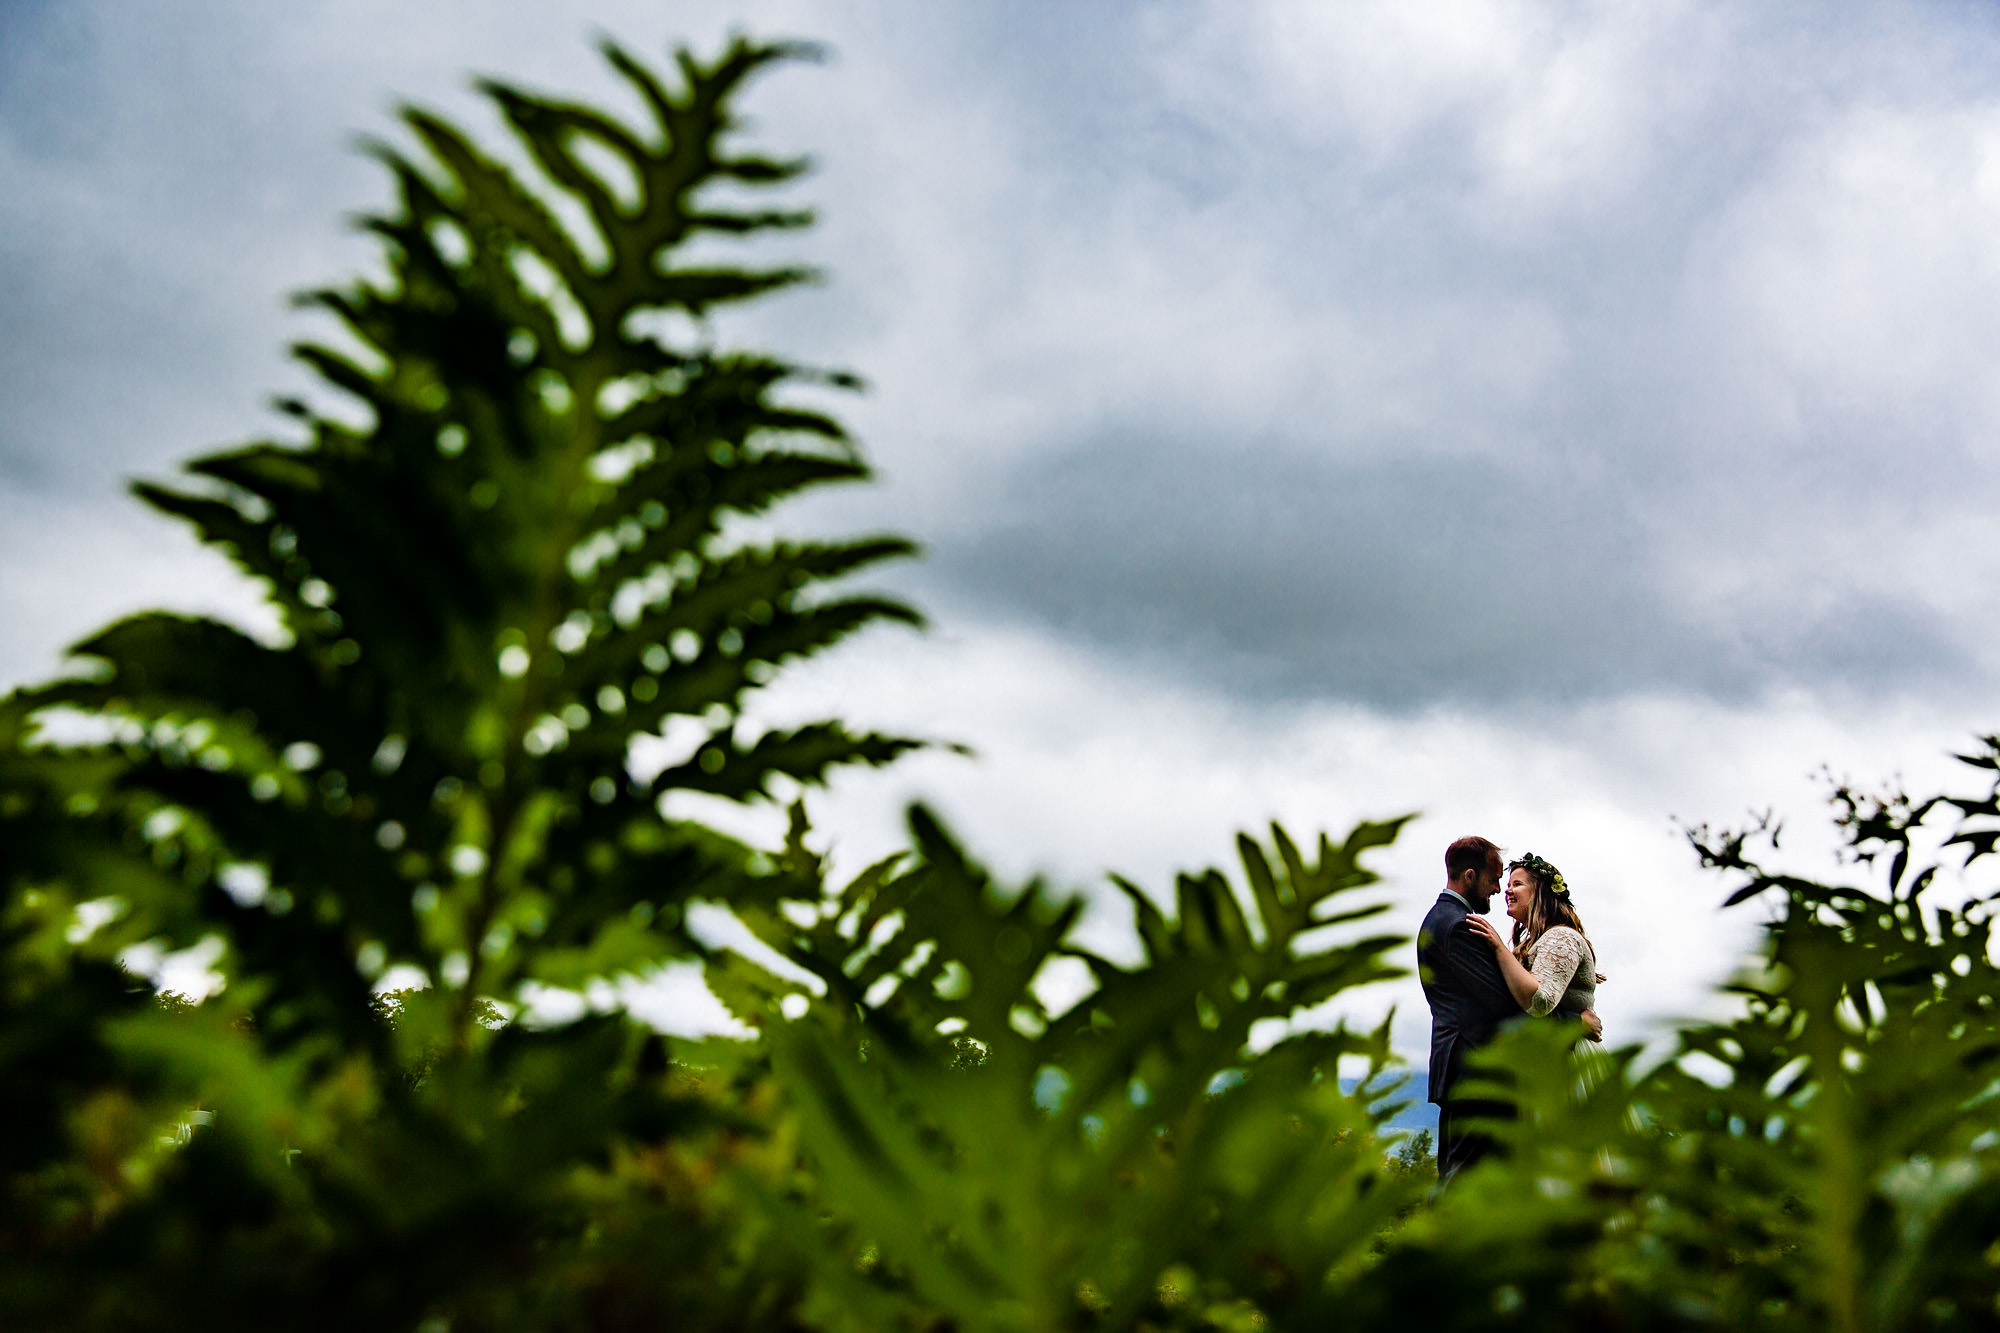 Wedding portraits at Sugarloaf Mountain in western Maine